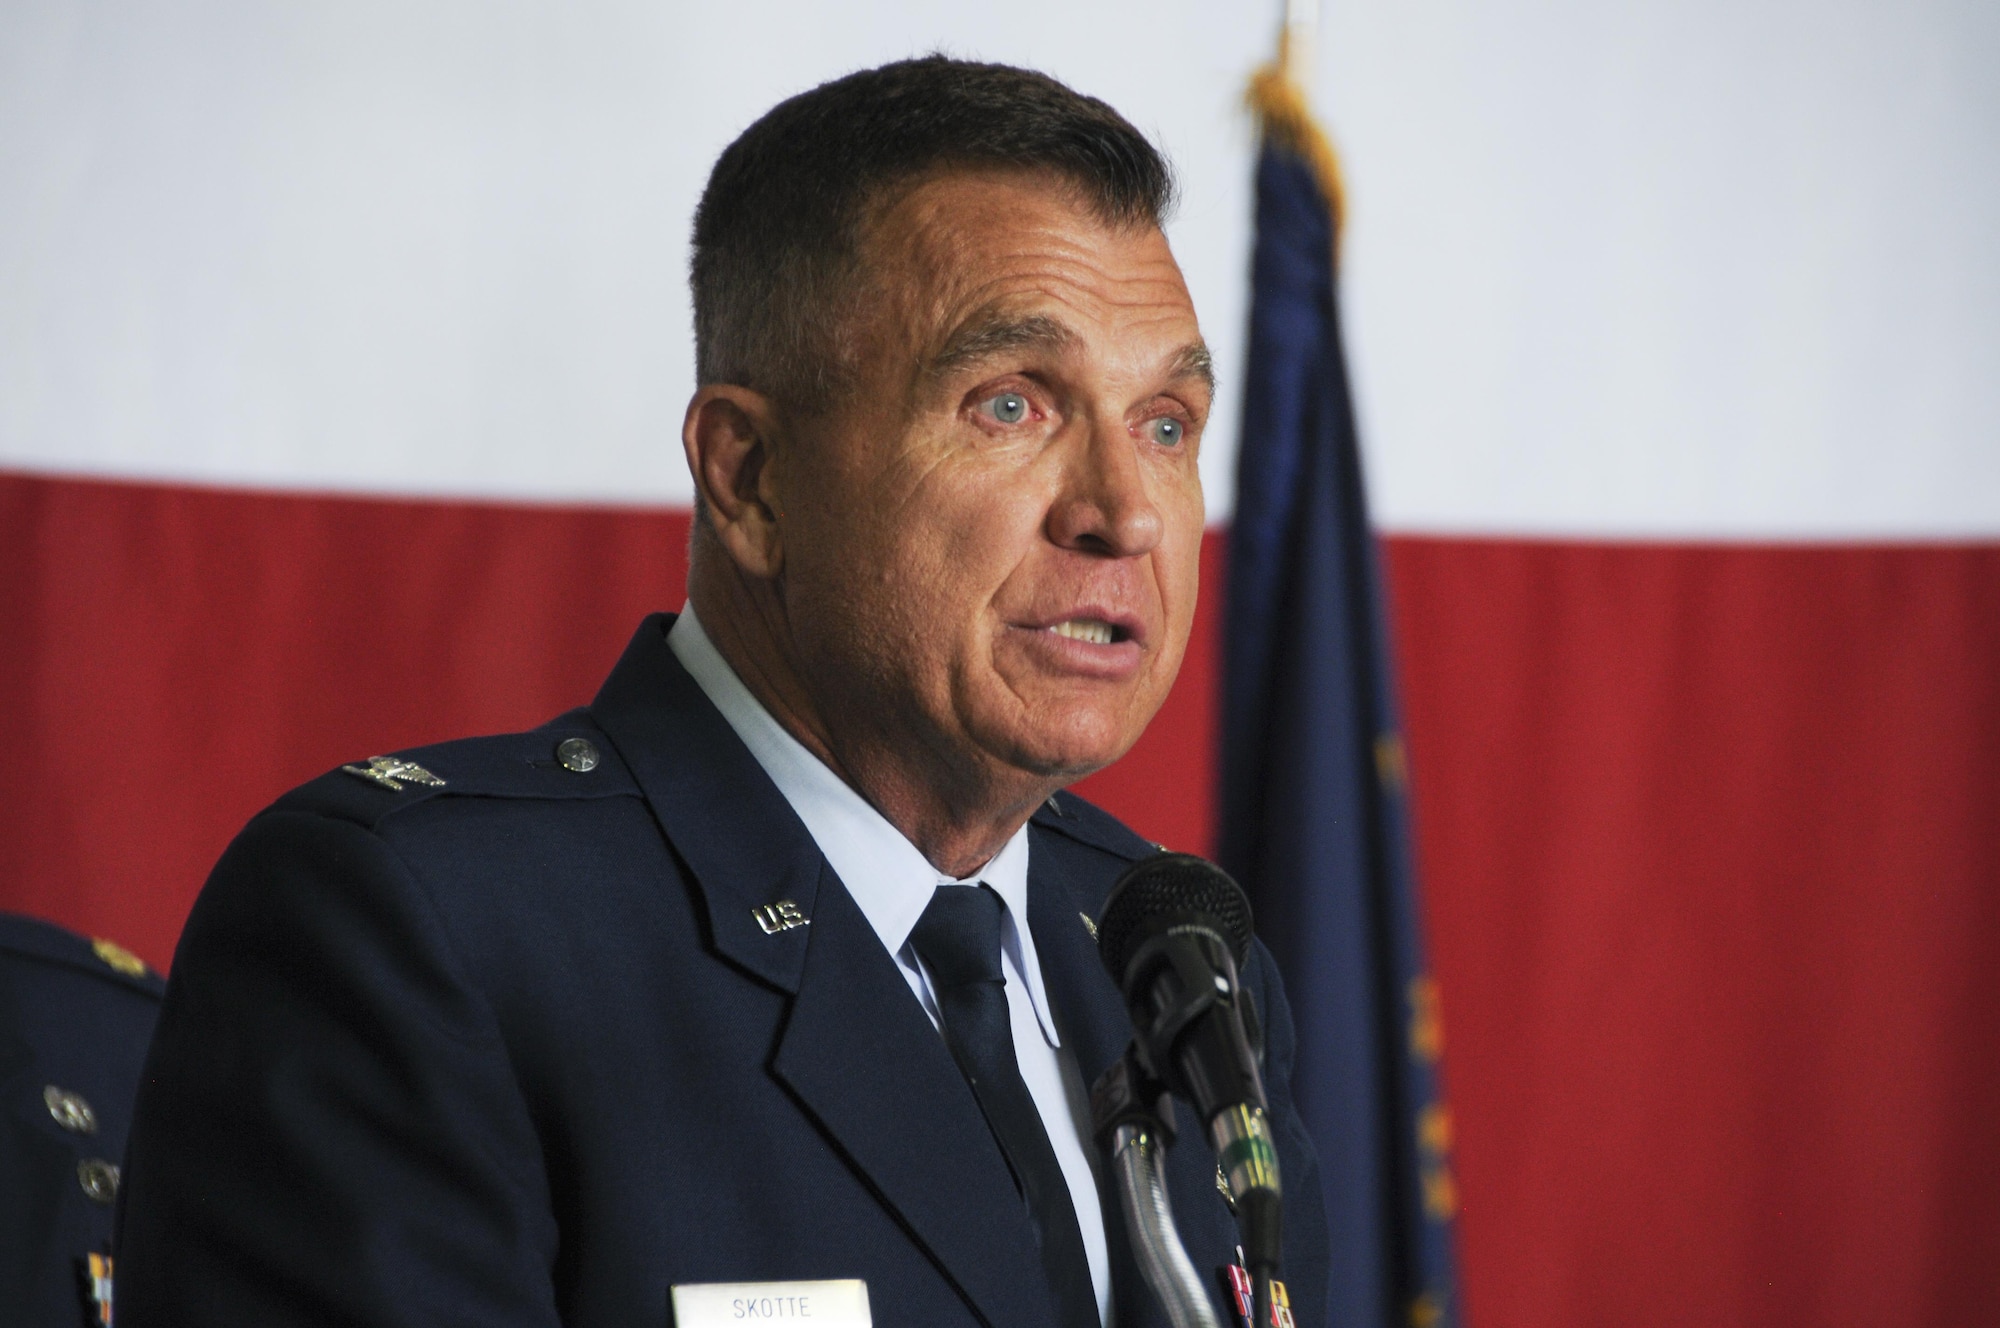 170603-Z-BD327-114: U.S. Air Force Col. Daniel Skotte, the commander of the 146th Airlift Wing Medical Group, speaks to the assembled crowd following his official retirement after serving for nearly 50 years, June 3, 2017, at Kingsley Field, Ore.  His remarks touched upon his reasons for entering the service in 1967 and at times the emotion of the moment was evident in his voice while he and the crowd shared a laugh during lighter moments. (U.S. Air National Guard photo by Senior Airman Riley Johnson)